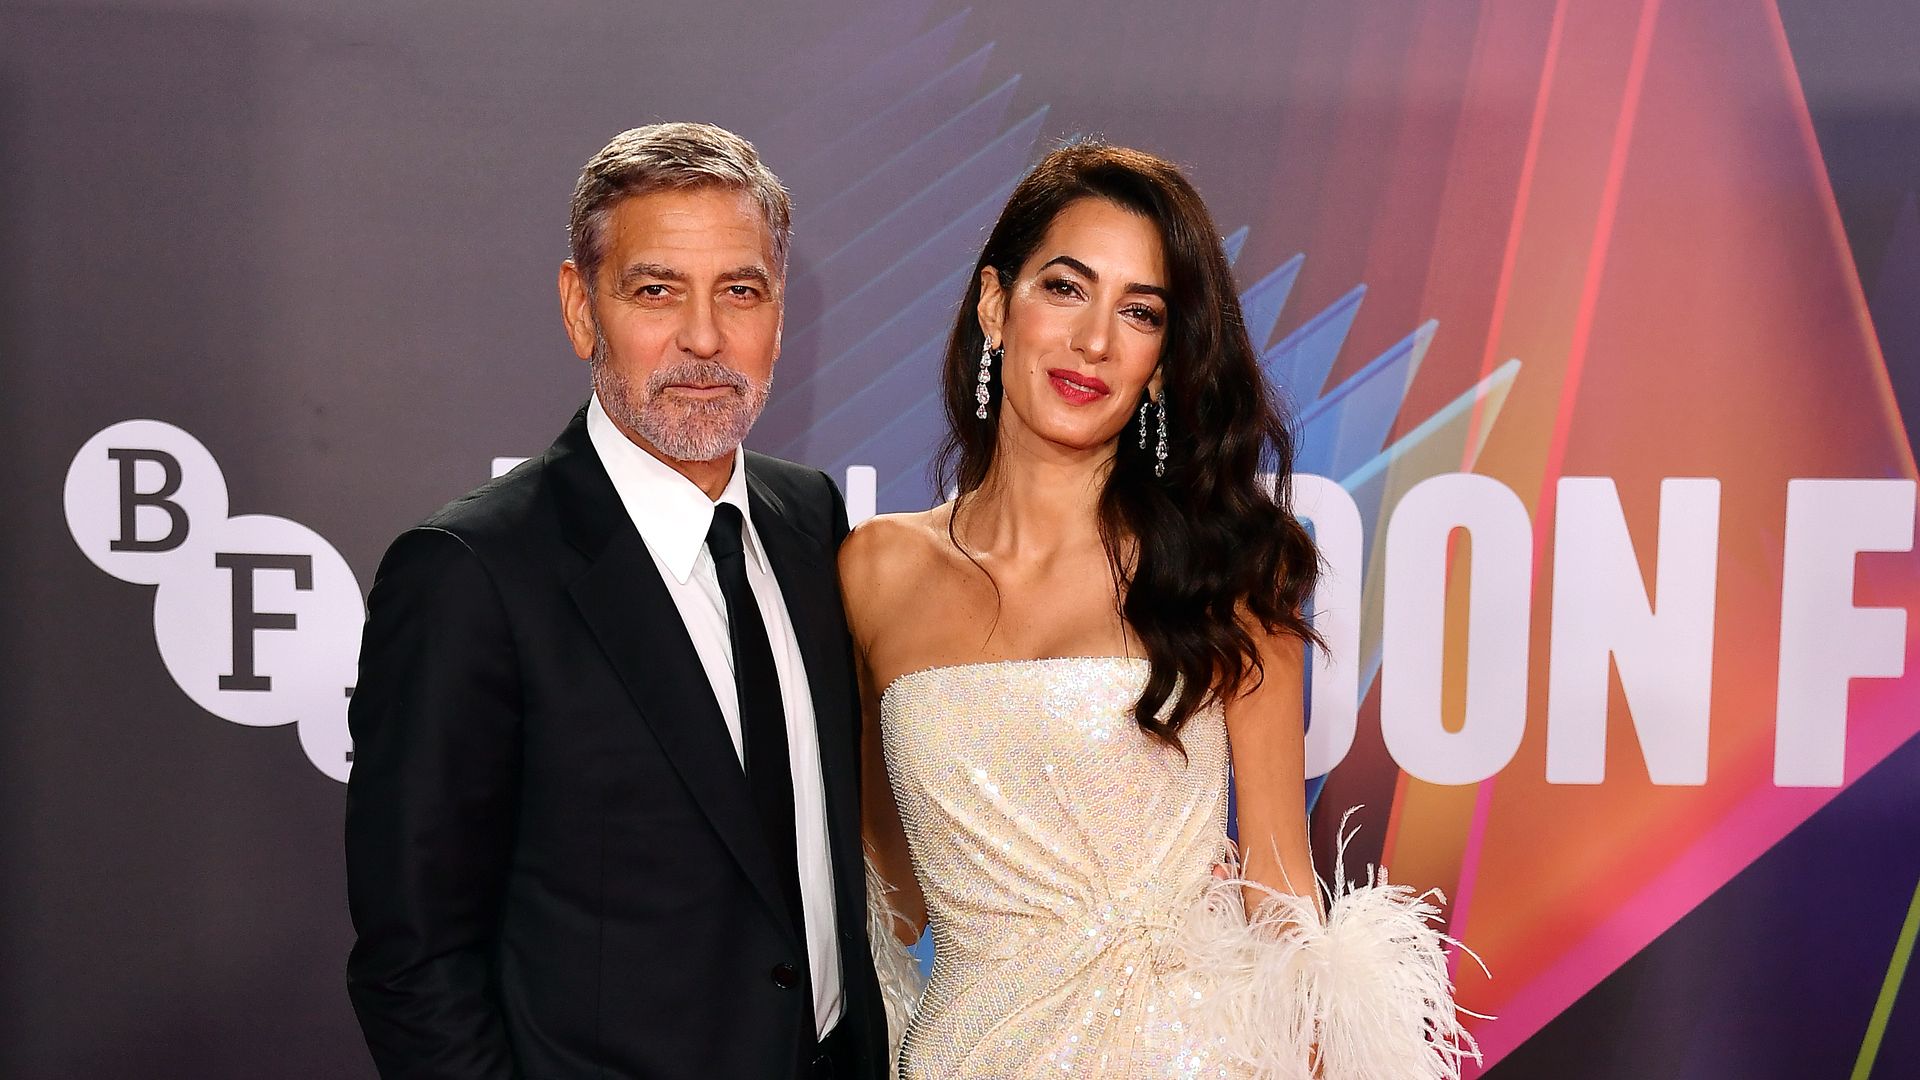 George Clooney and Amal Clooney at "The Tender Bar" Premiere at the 65th BFI London Film Festival in October 2021